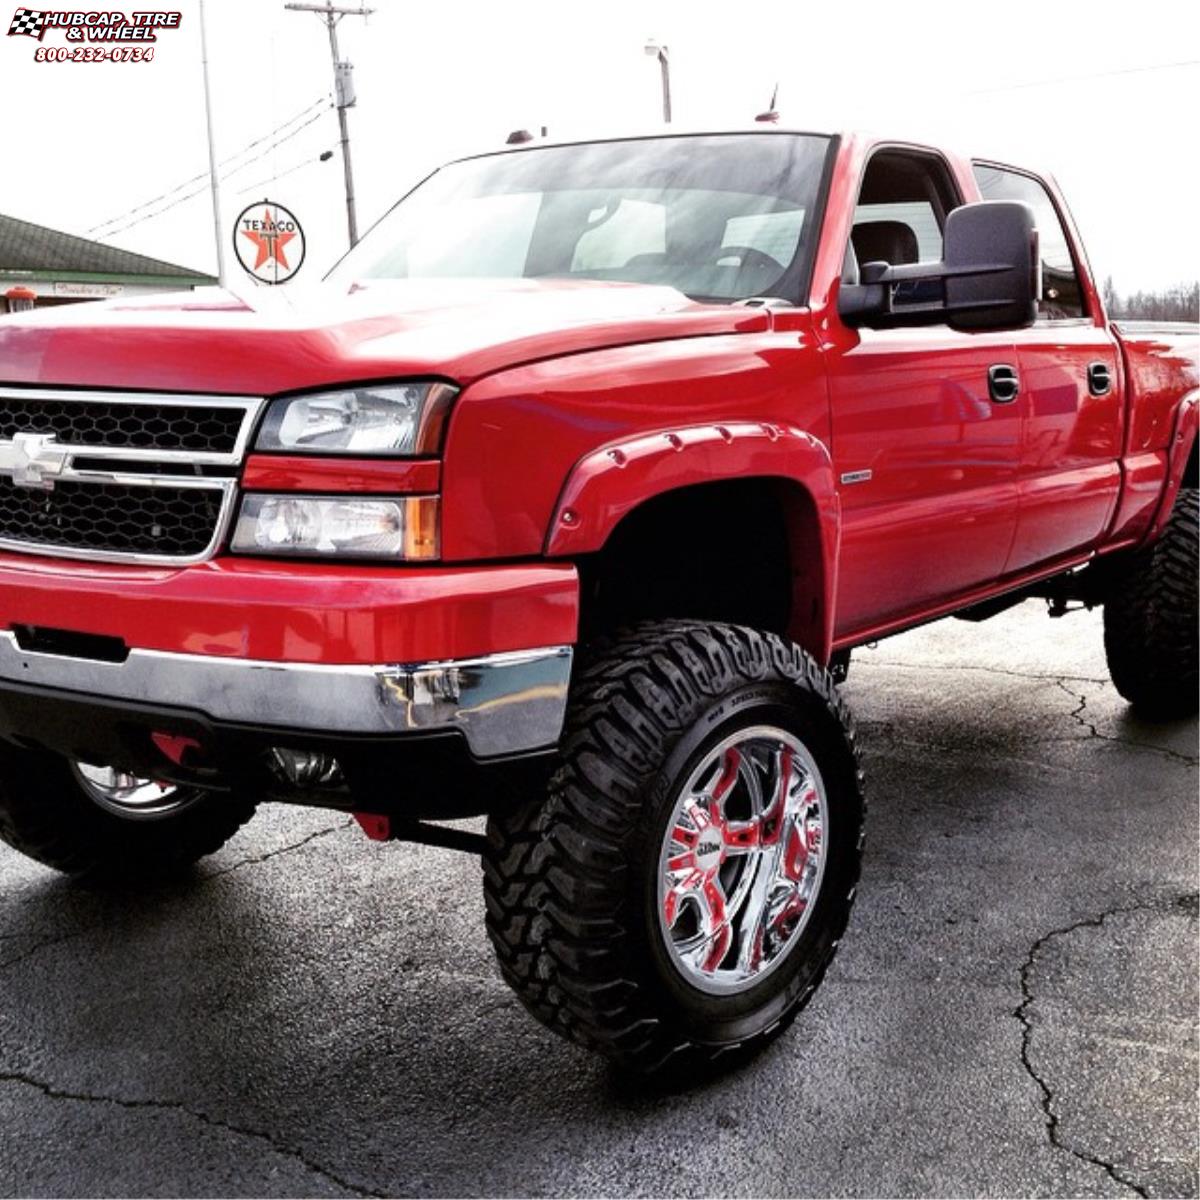 vehicle gallery/chevrolet silverado 1500 moto metal mo969  Chrome Red Accents wheels and rims